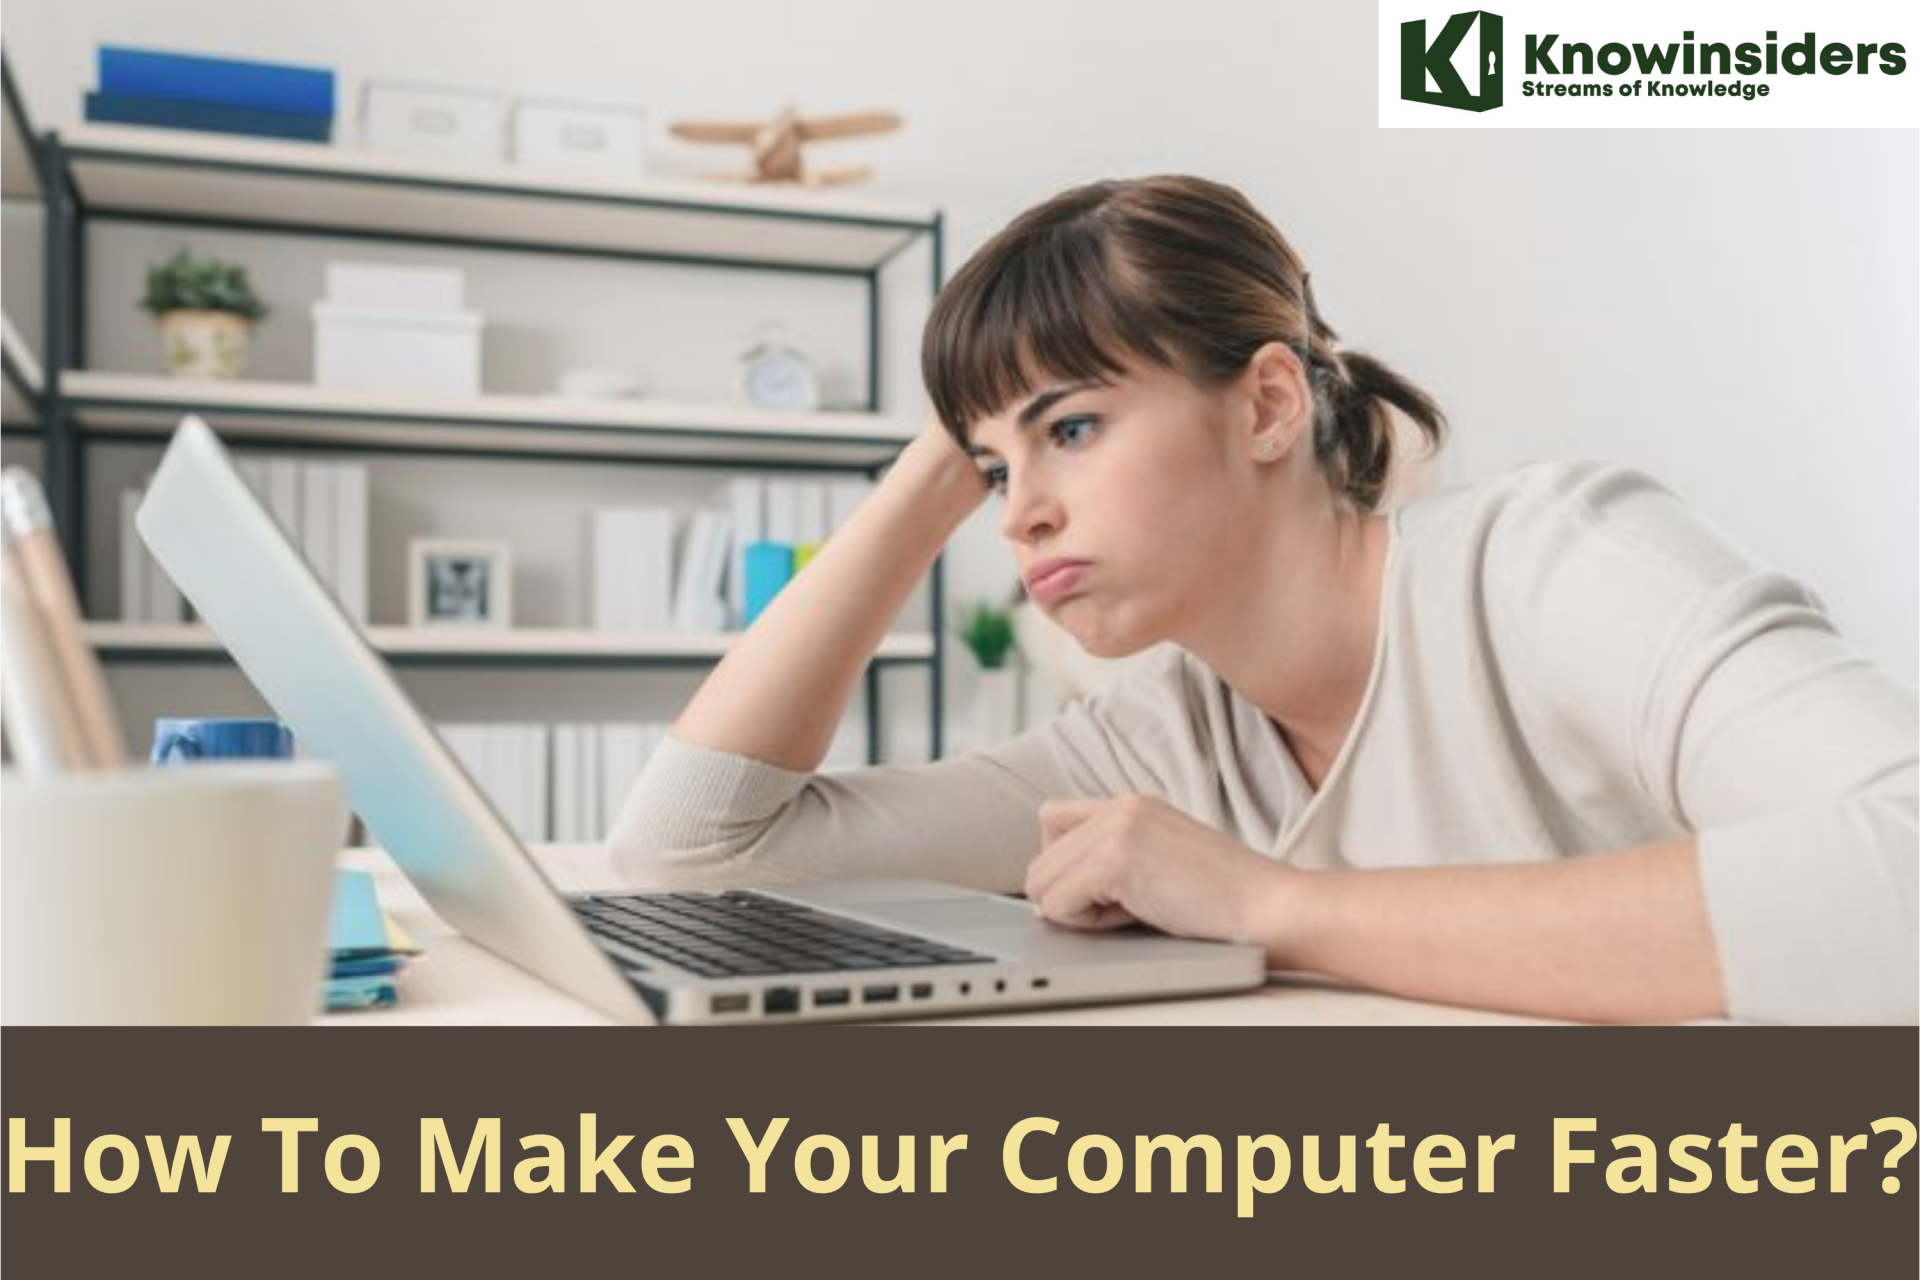 How To Make Your Computer Faster With the Simpliest Ways?